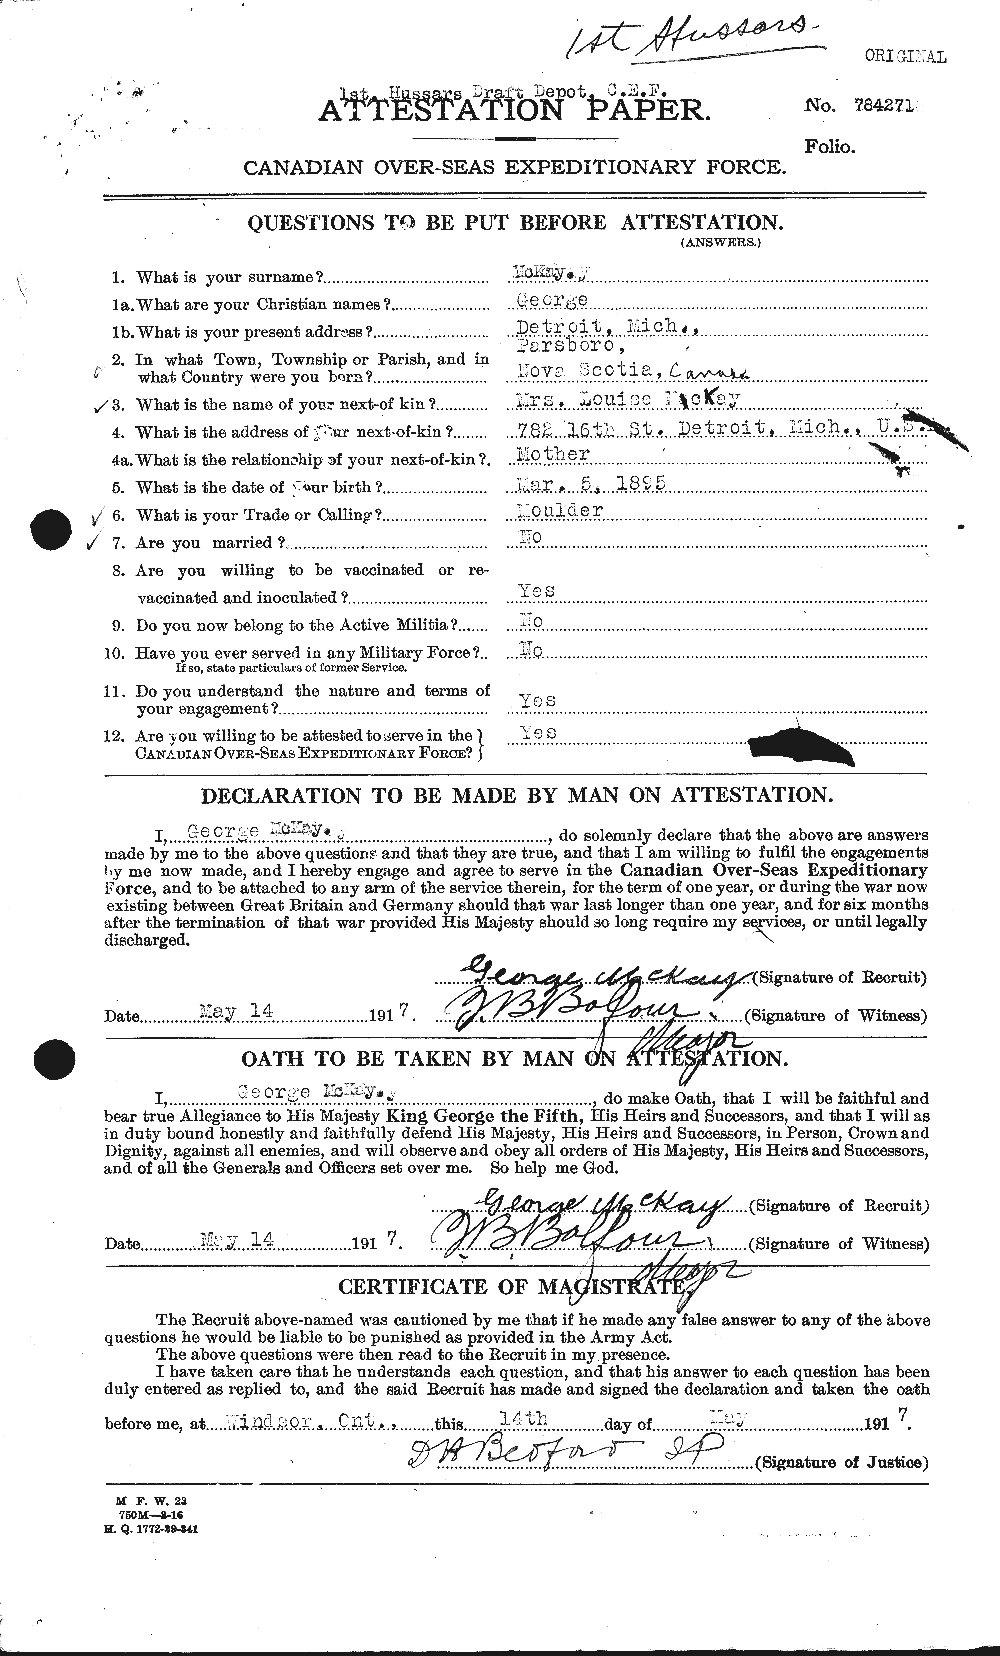 Personnel Records of the First World War - CEF 534651a